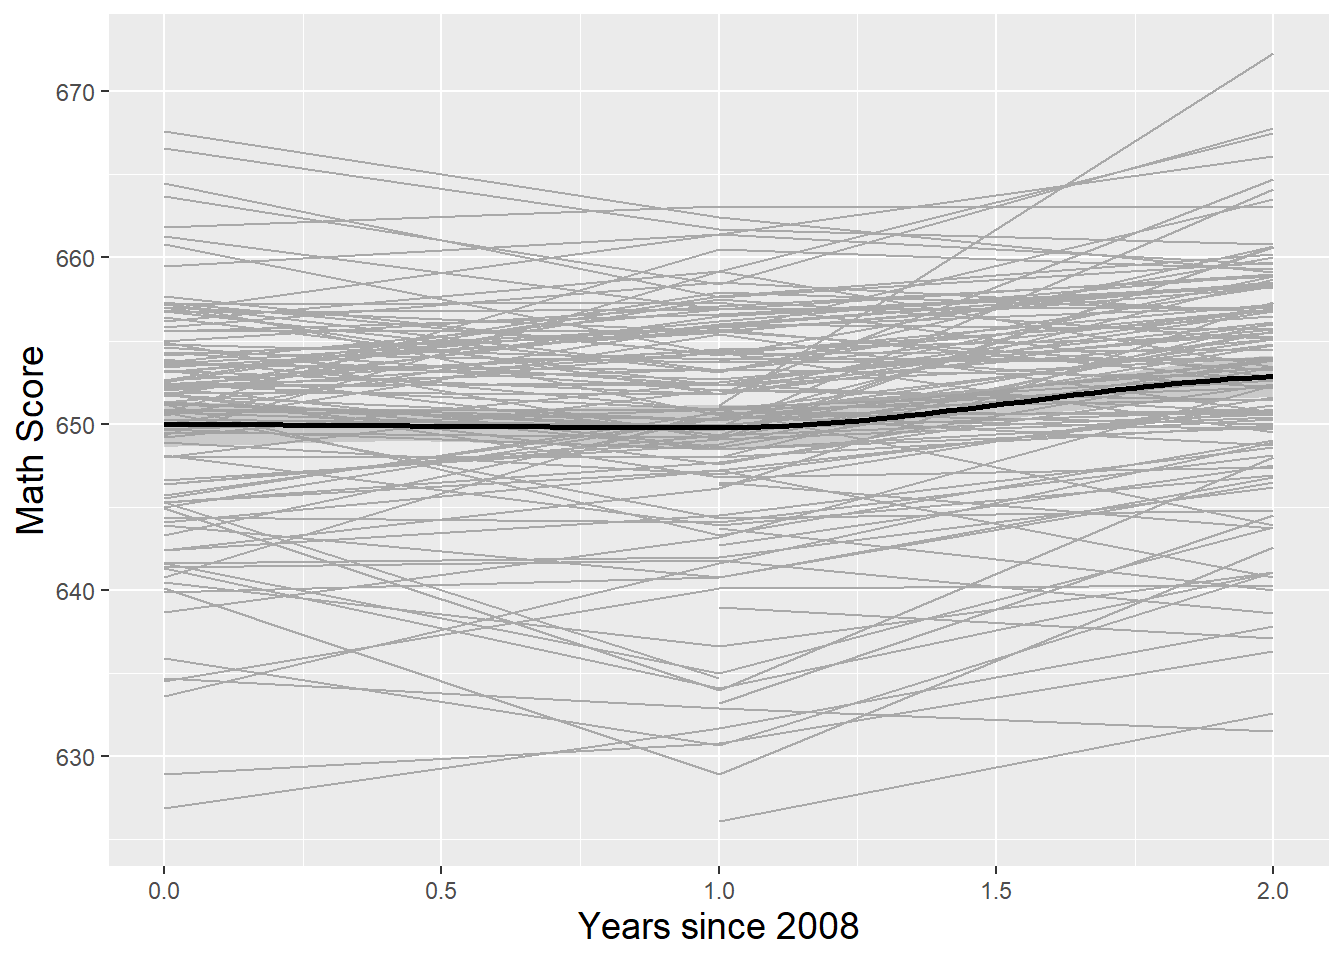  Spaghetti plot of math scores over time by school, for all the charter schools and a random sample of public non-charter schools, with overall fit using loess (bold).